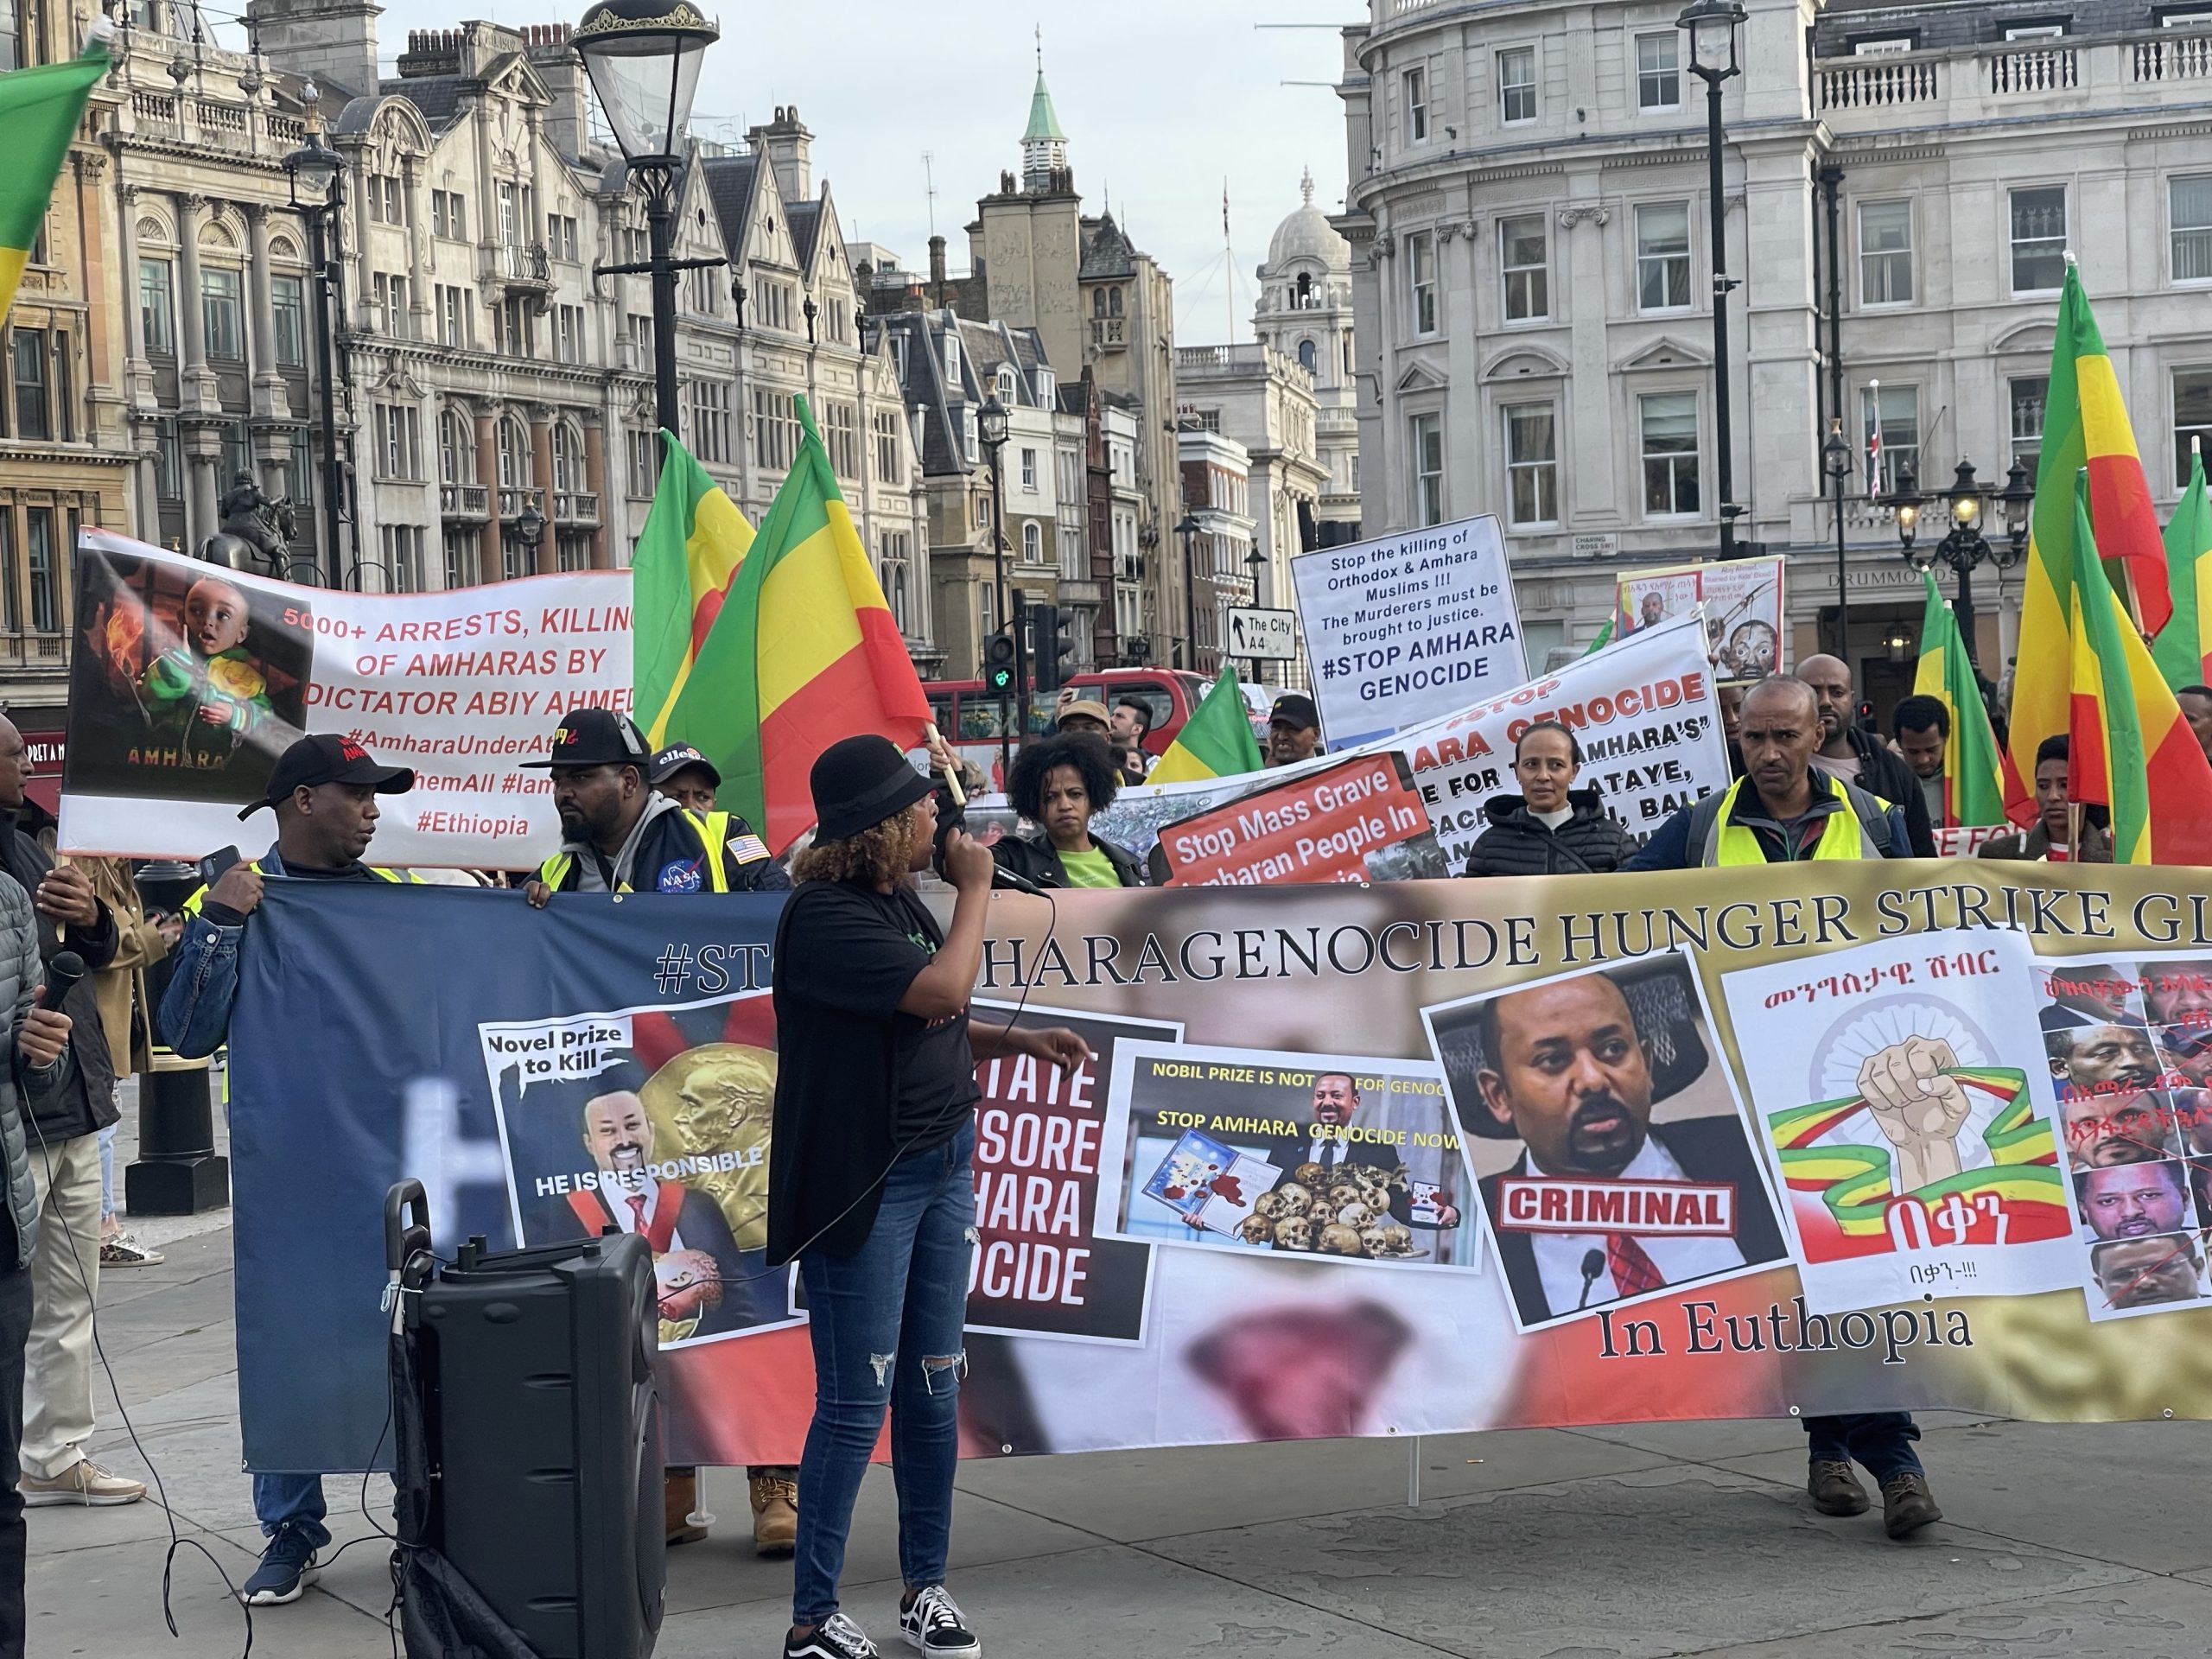 Amhara Association in America demand the people of Amhara to be delegated by 40 representatives at the peace talk in SA